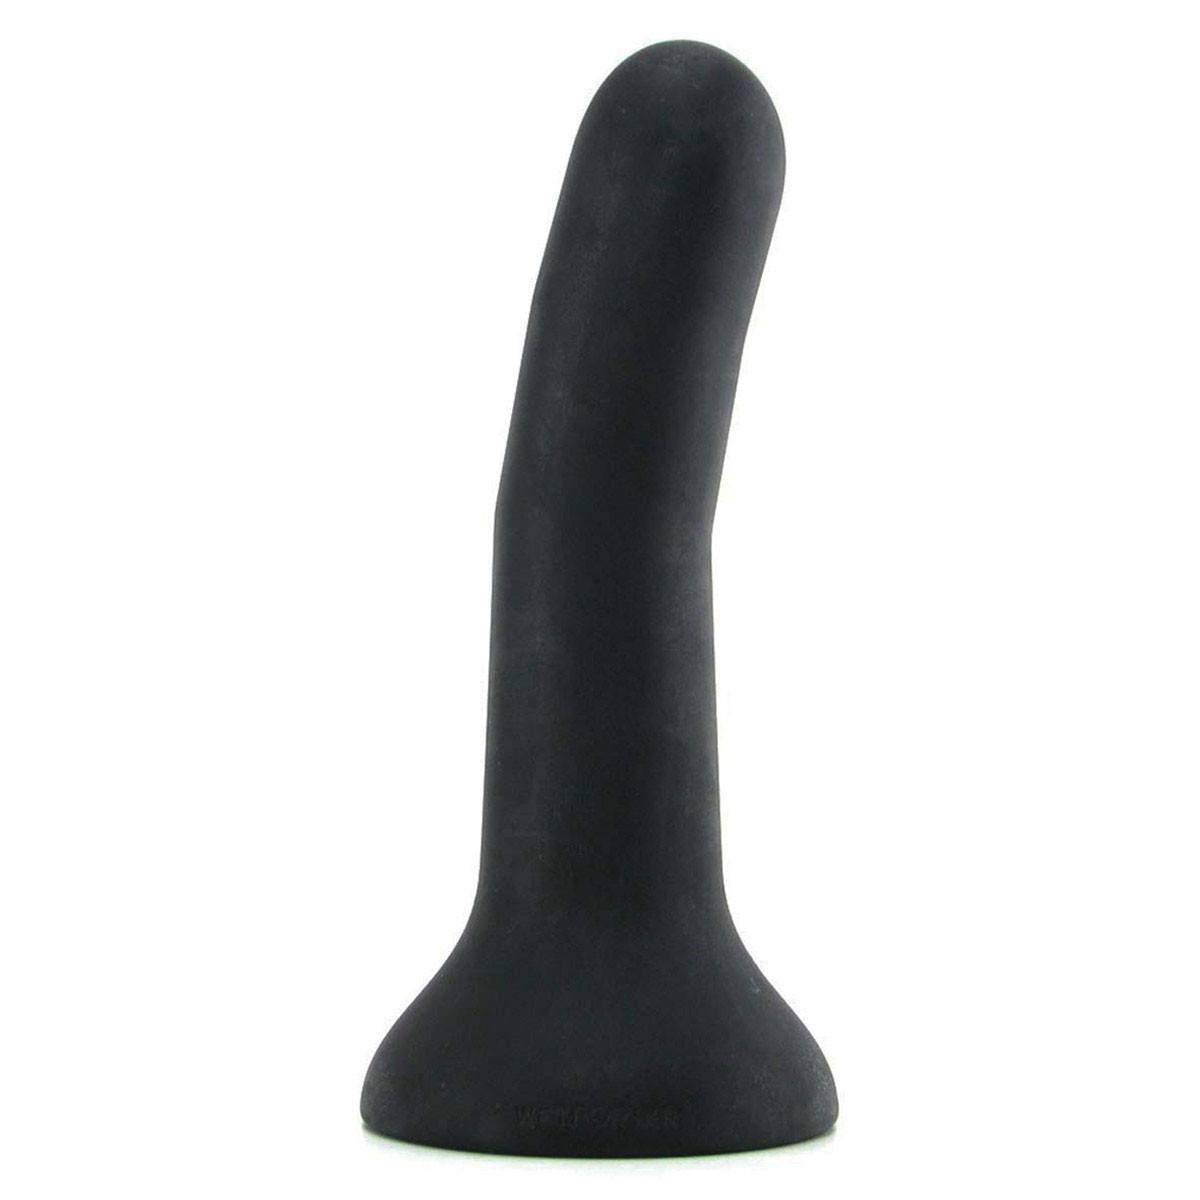 Sex Toy Five Silicone Dildo by Wet For Her - Hamilton Park Electronics